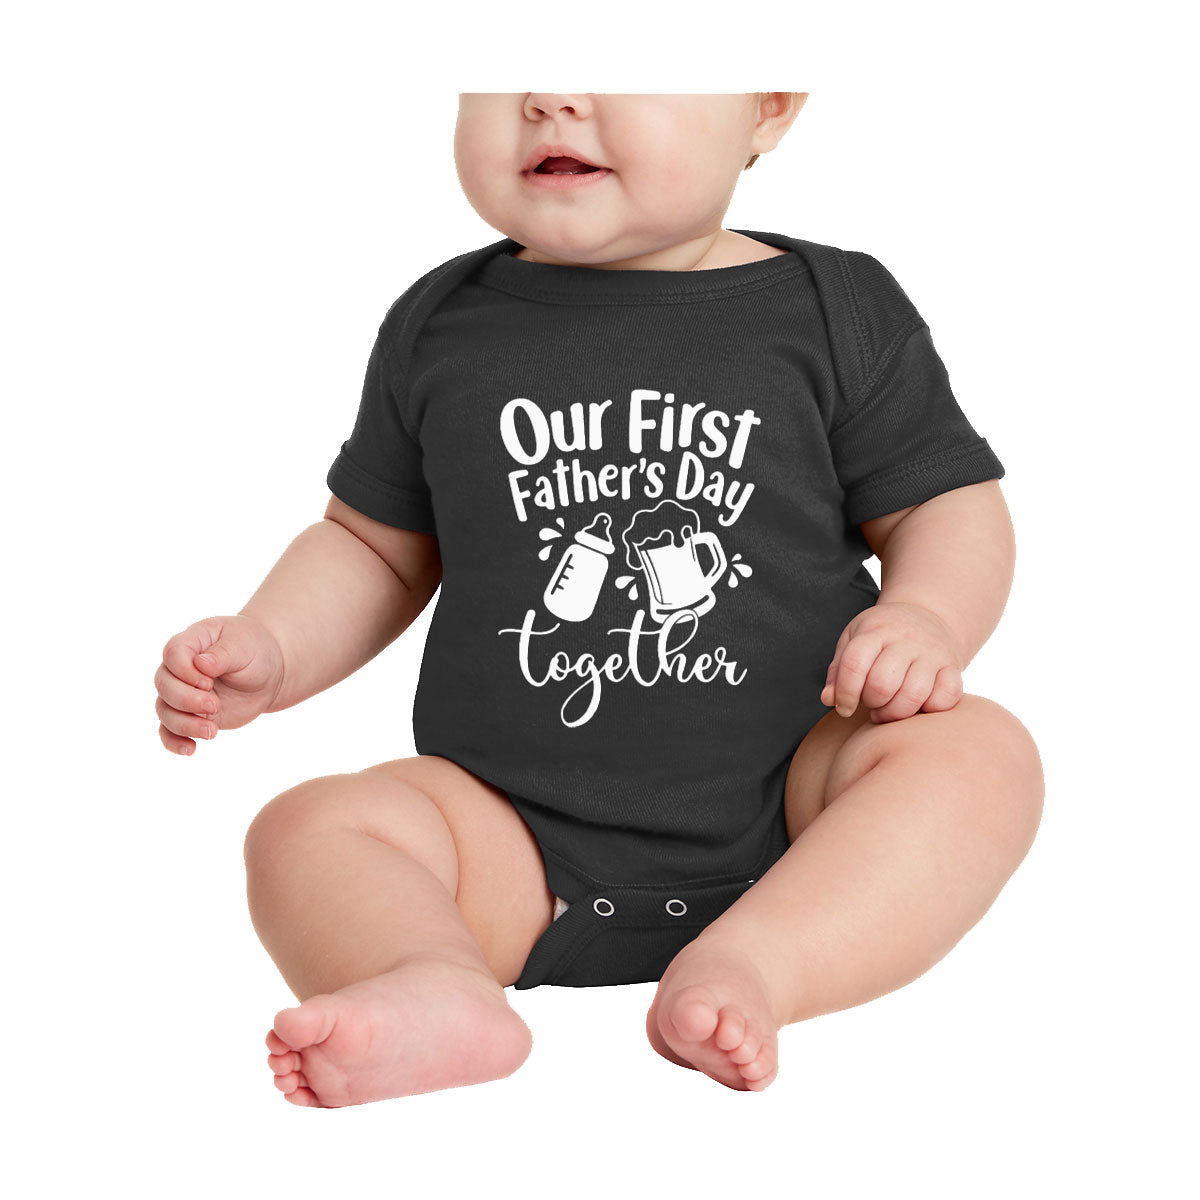 Our First Father's Day Together Baby Onesie